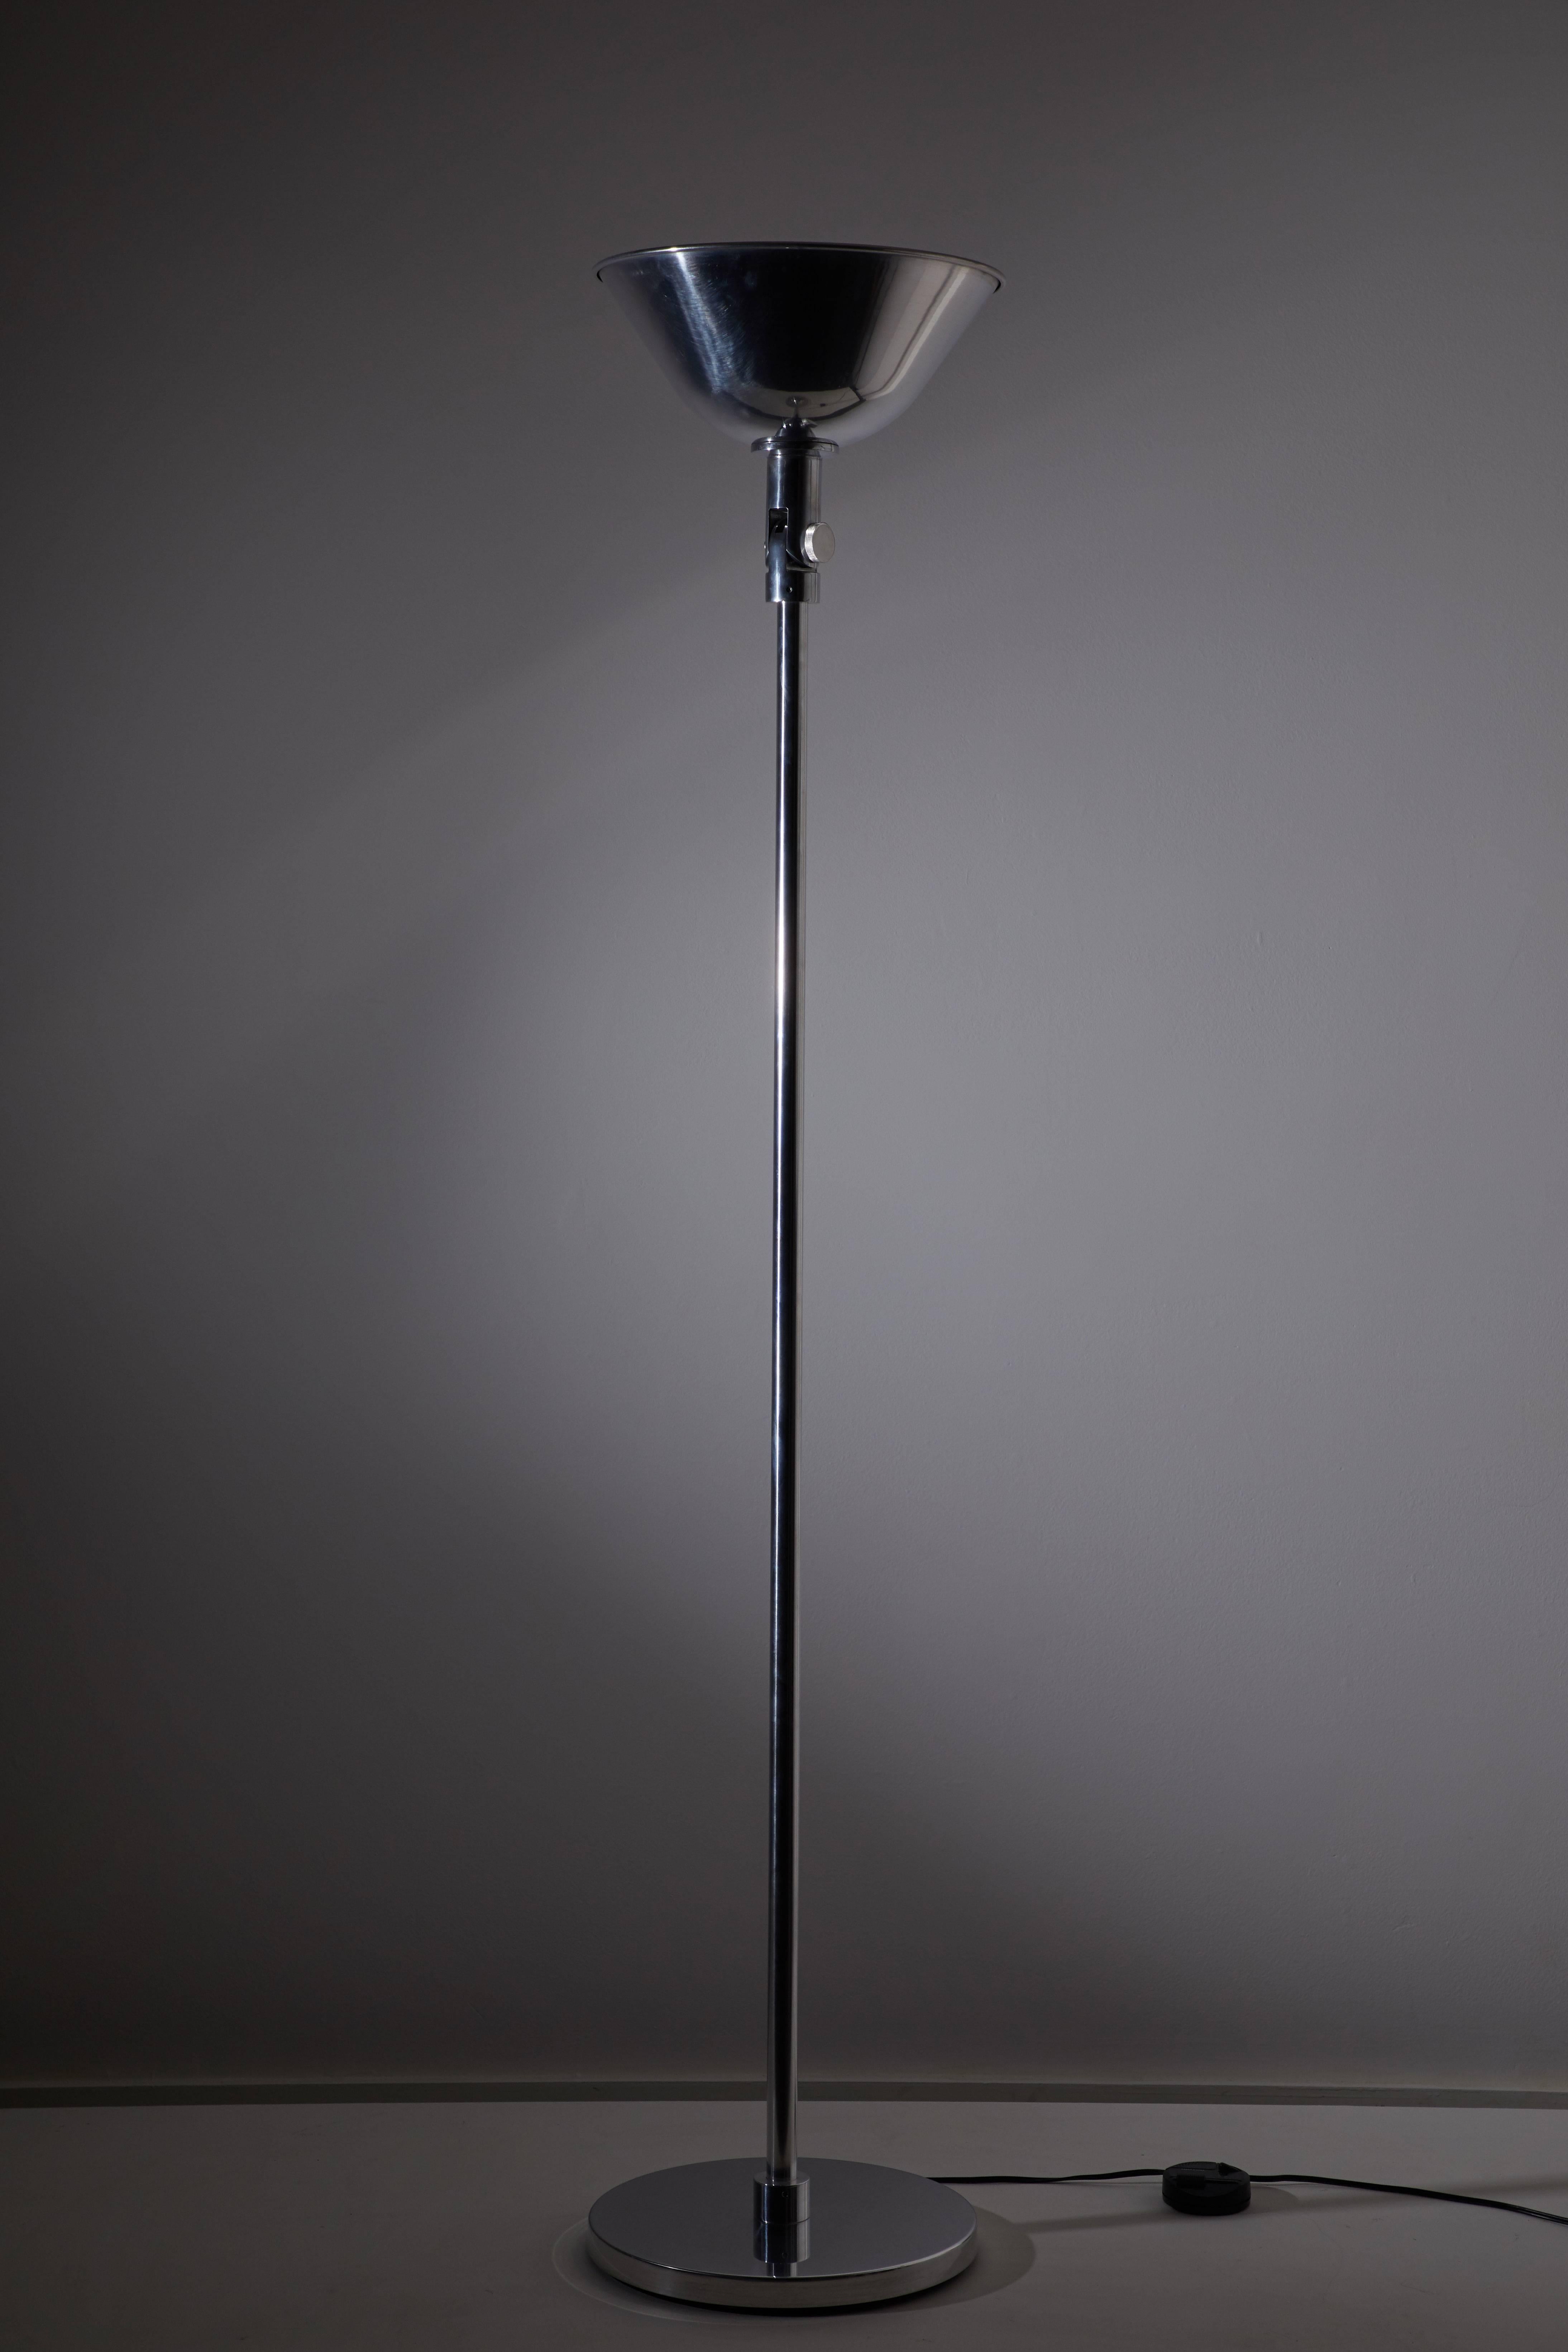 Spanish GATCPAC Floor Lamp by Josep Torres Clavé for Santa & Cole